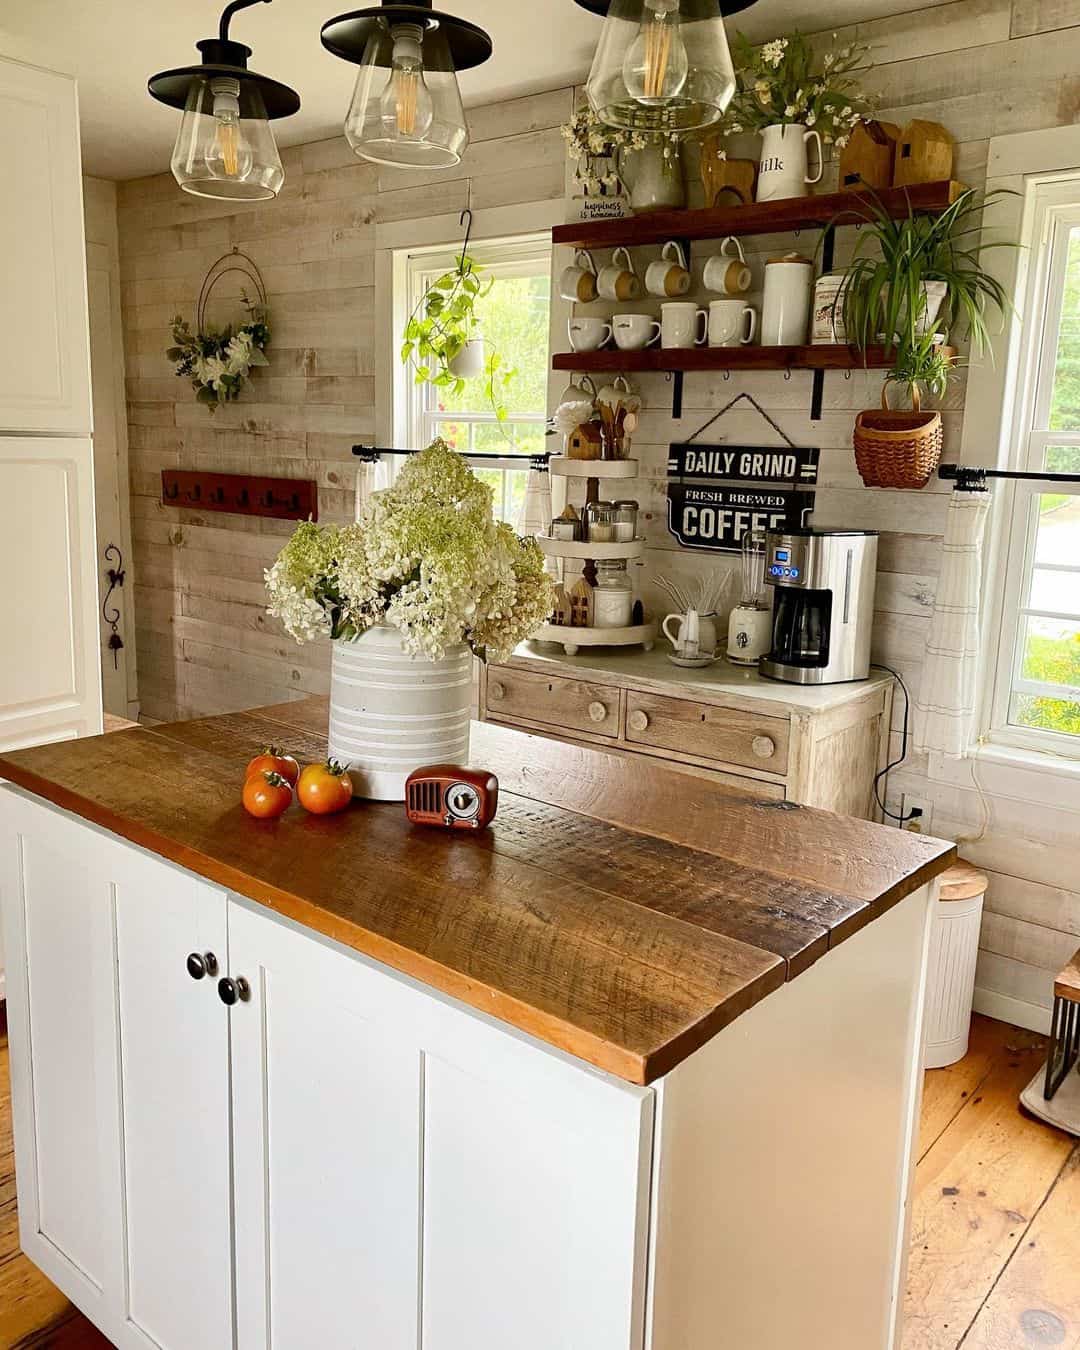 Décor Ideas for Country Kitchen Shelves